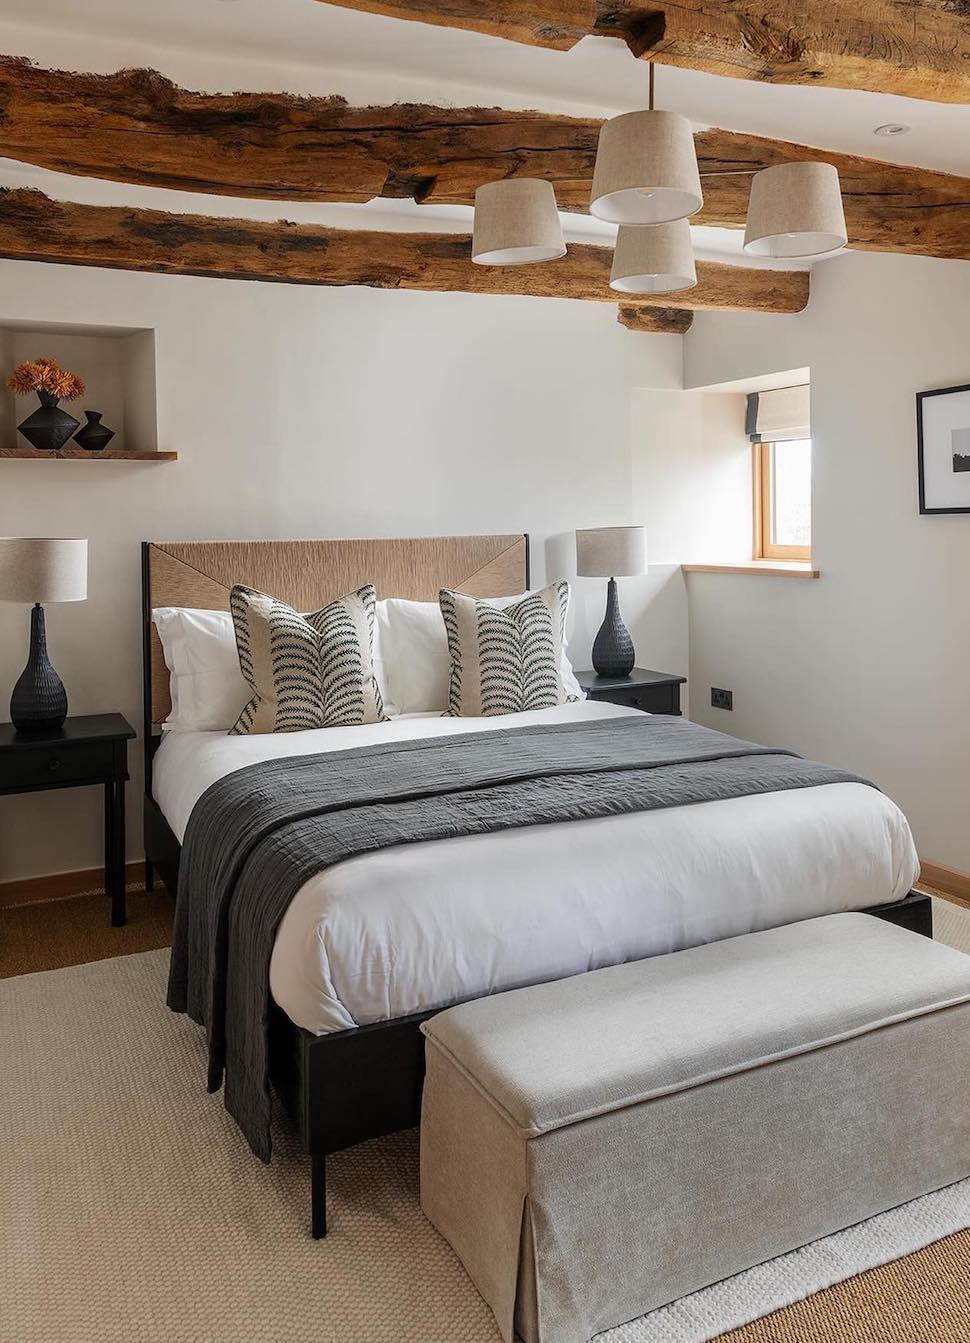 a bedroom with wooden beams, charcoal and white bedding, and modern decor